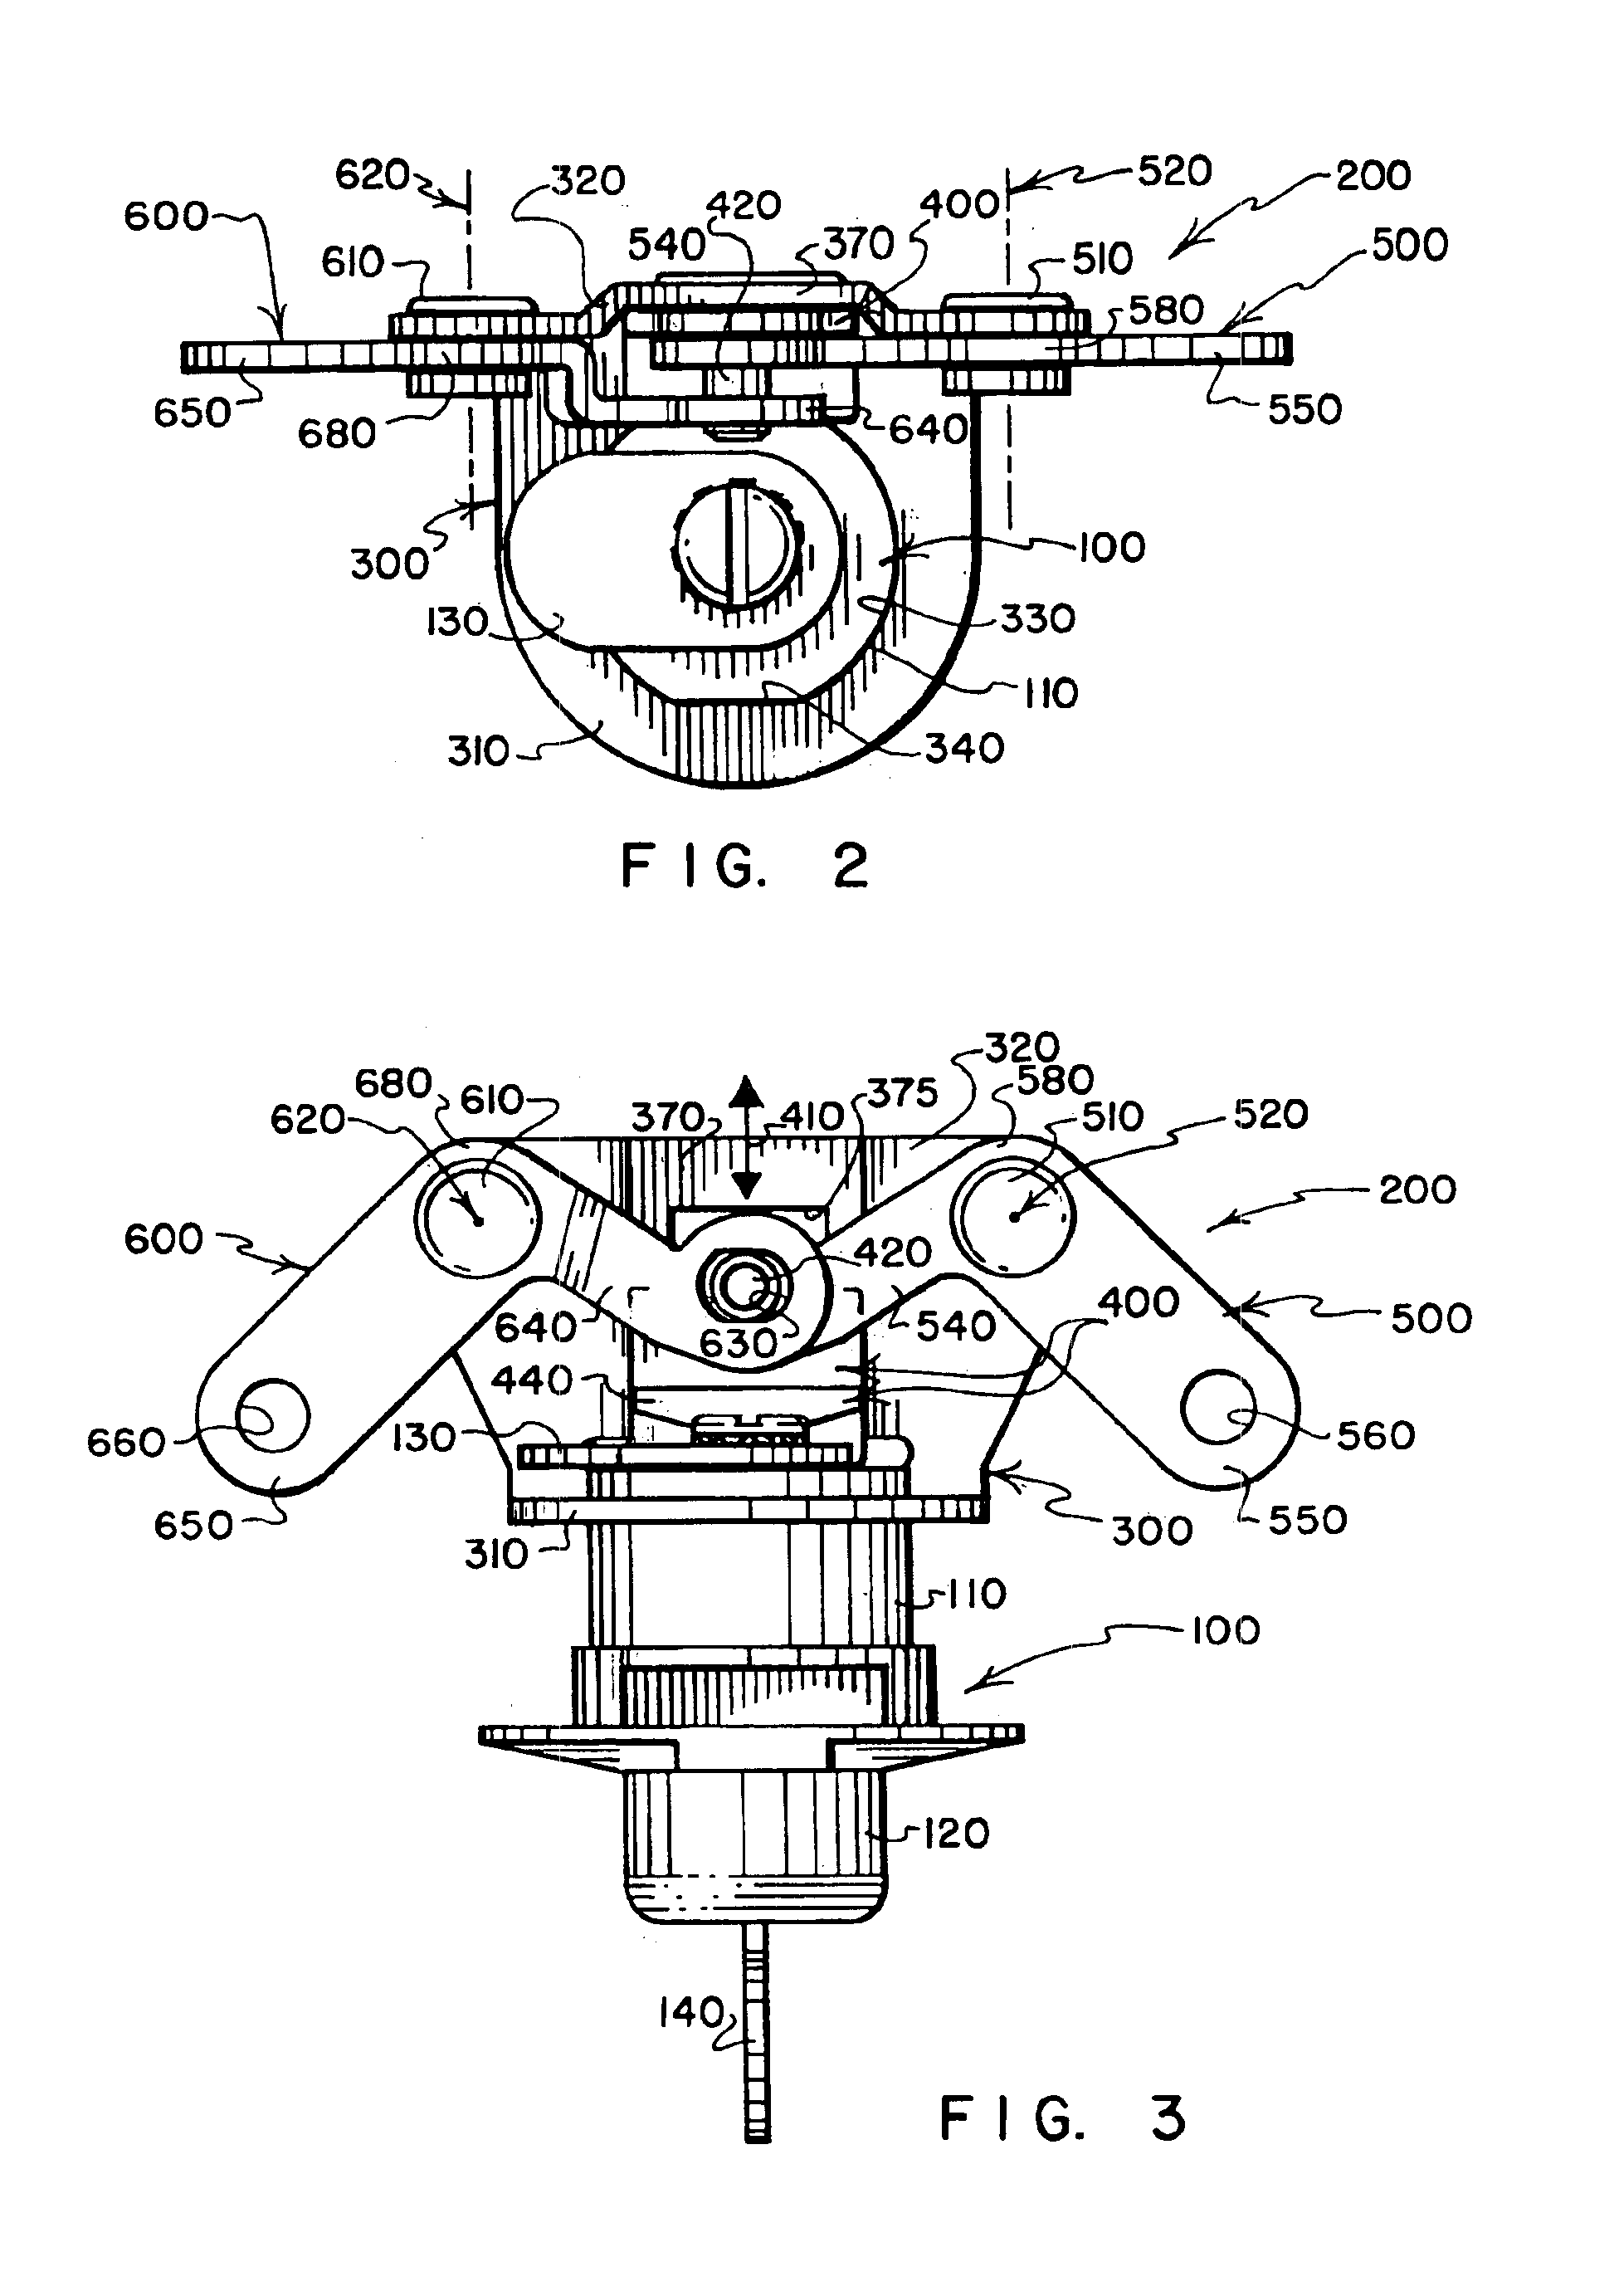 Linkage assembly for operating one or more latches